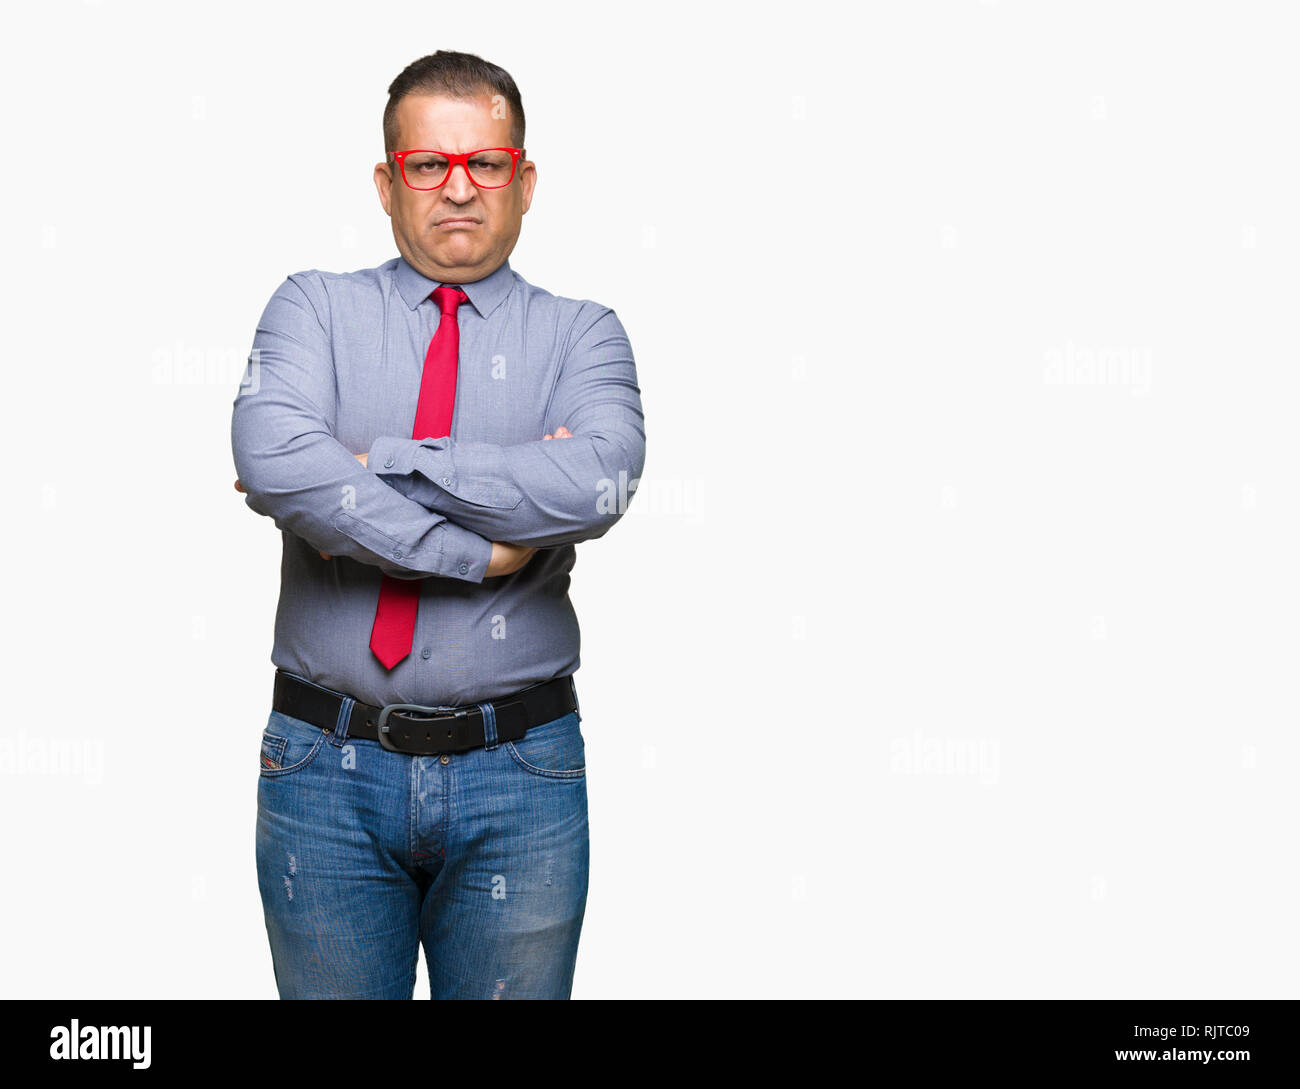 Middle age arab man wearing fashion red glasses over isolated background skeptic and nervous, disapproving expression on face with crossed arms. Negat Stock Photo